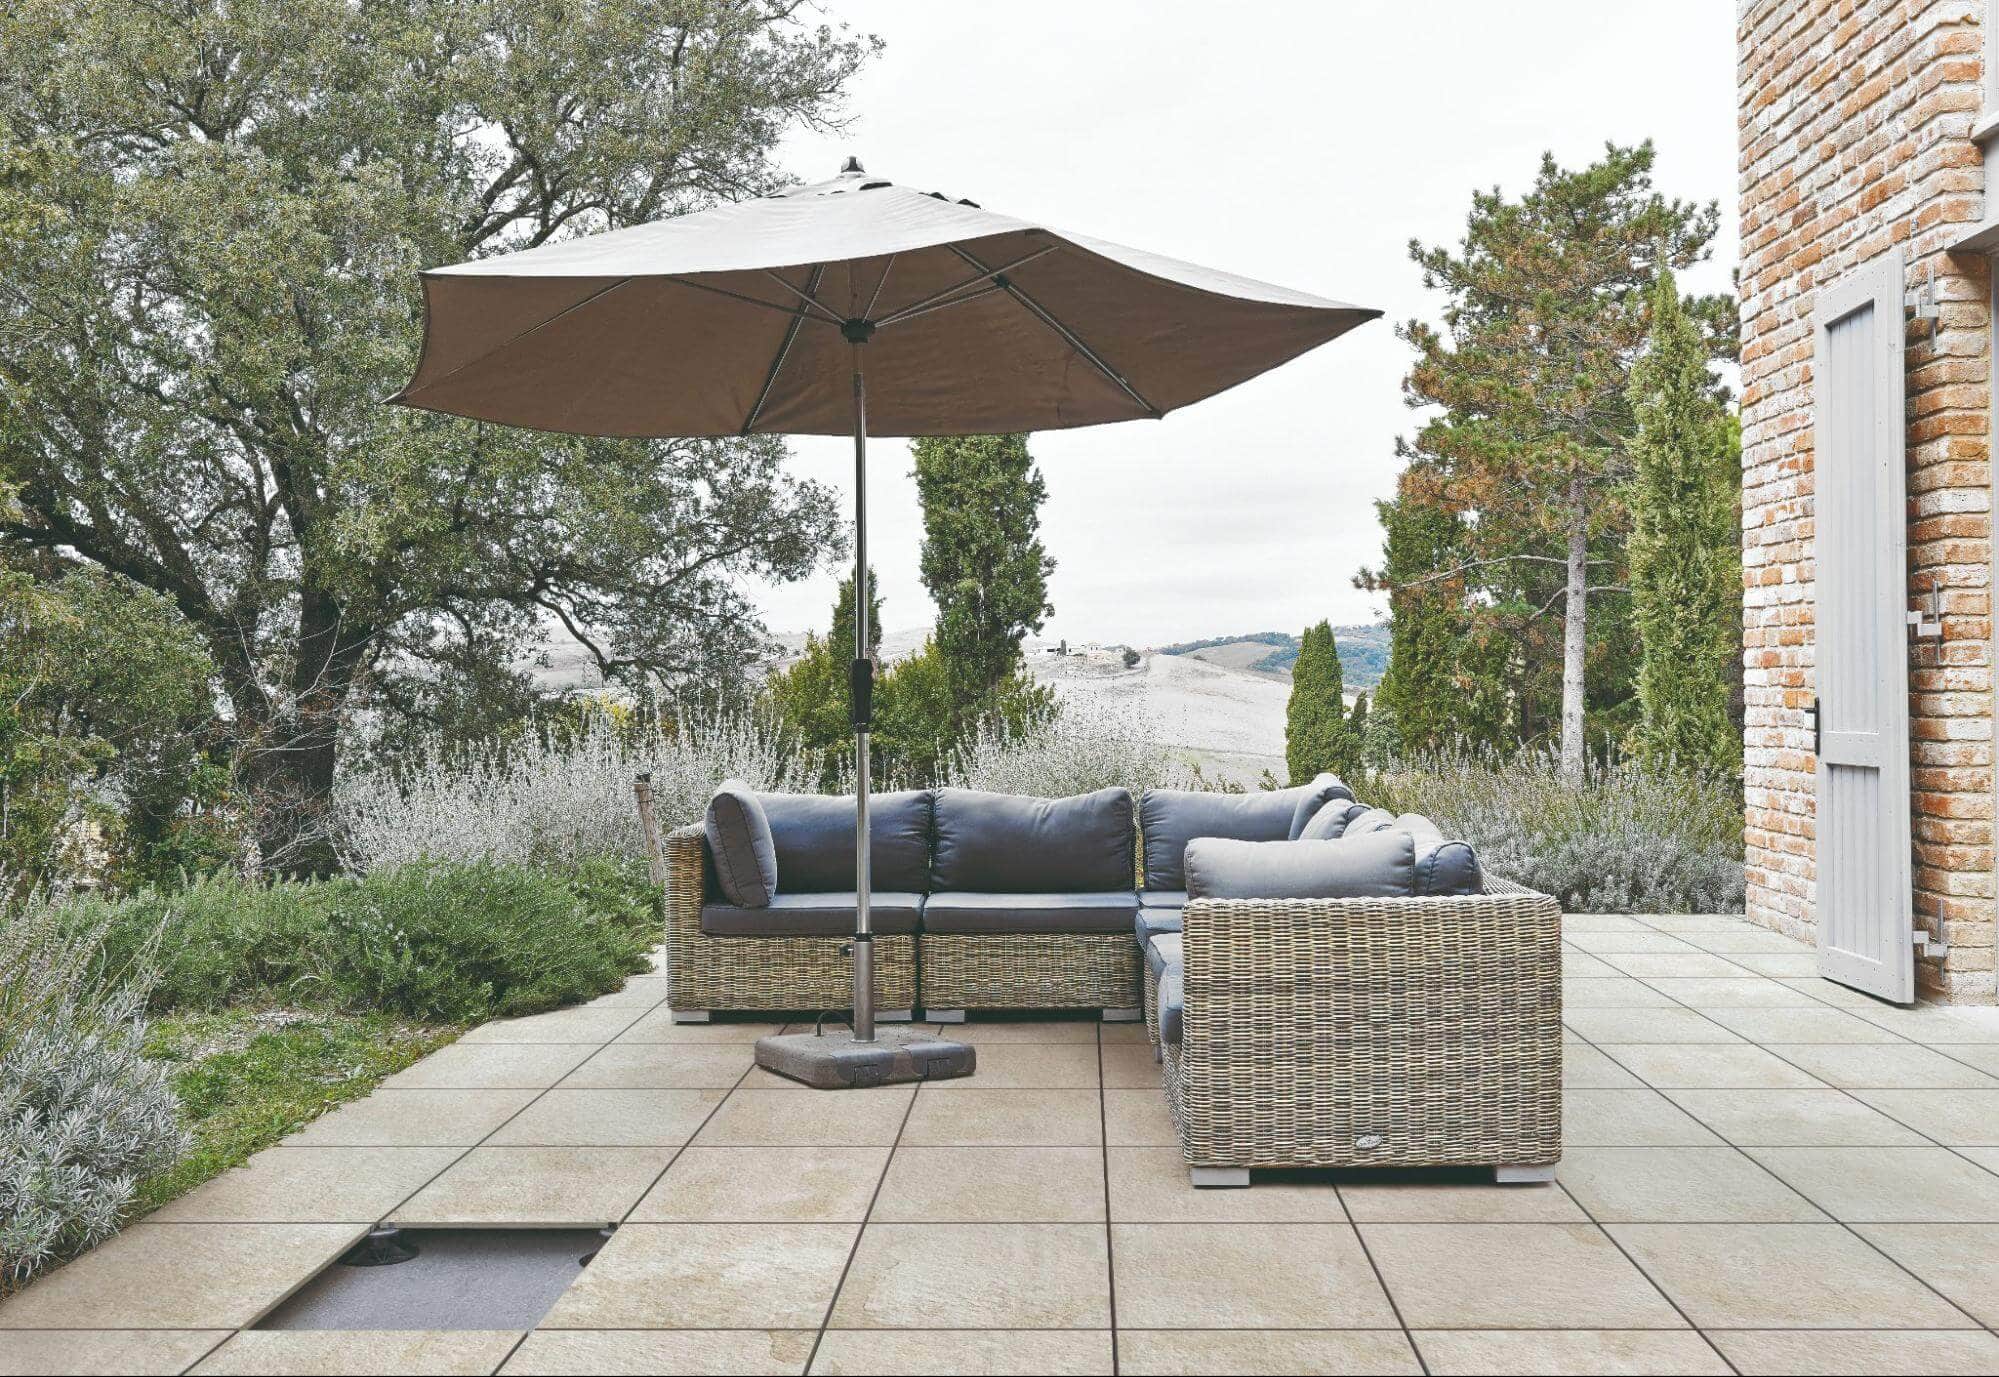 Outdoor seating space with porcelain pavers installed on raised pedestals or floating installation